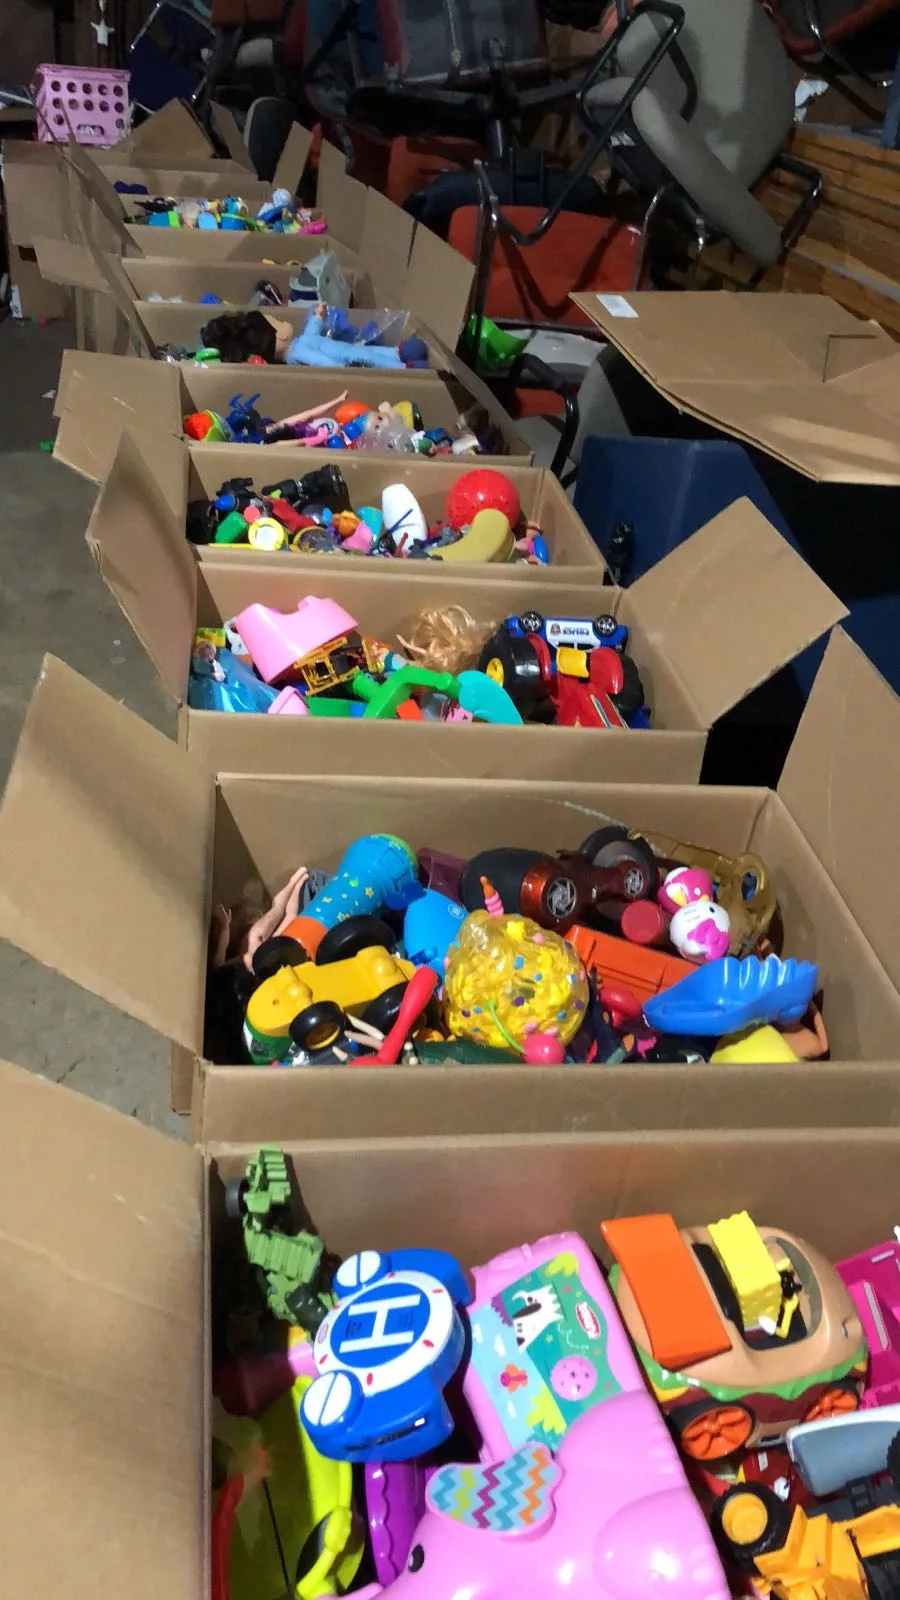 A box of used toys